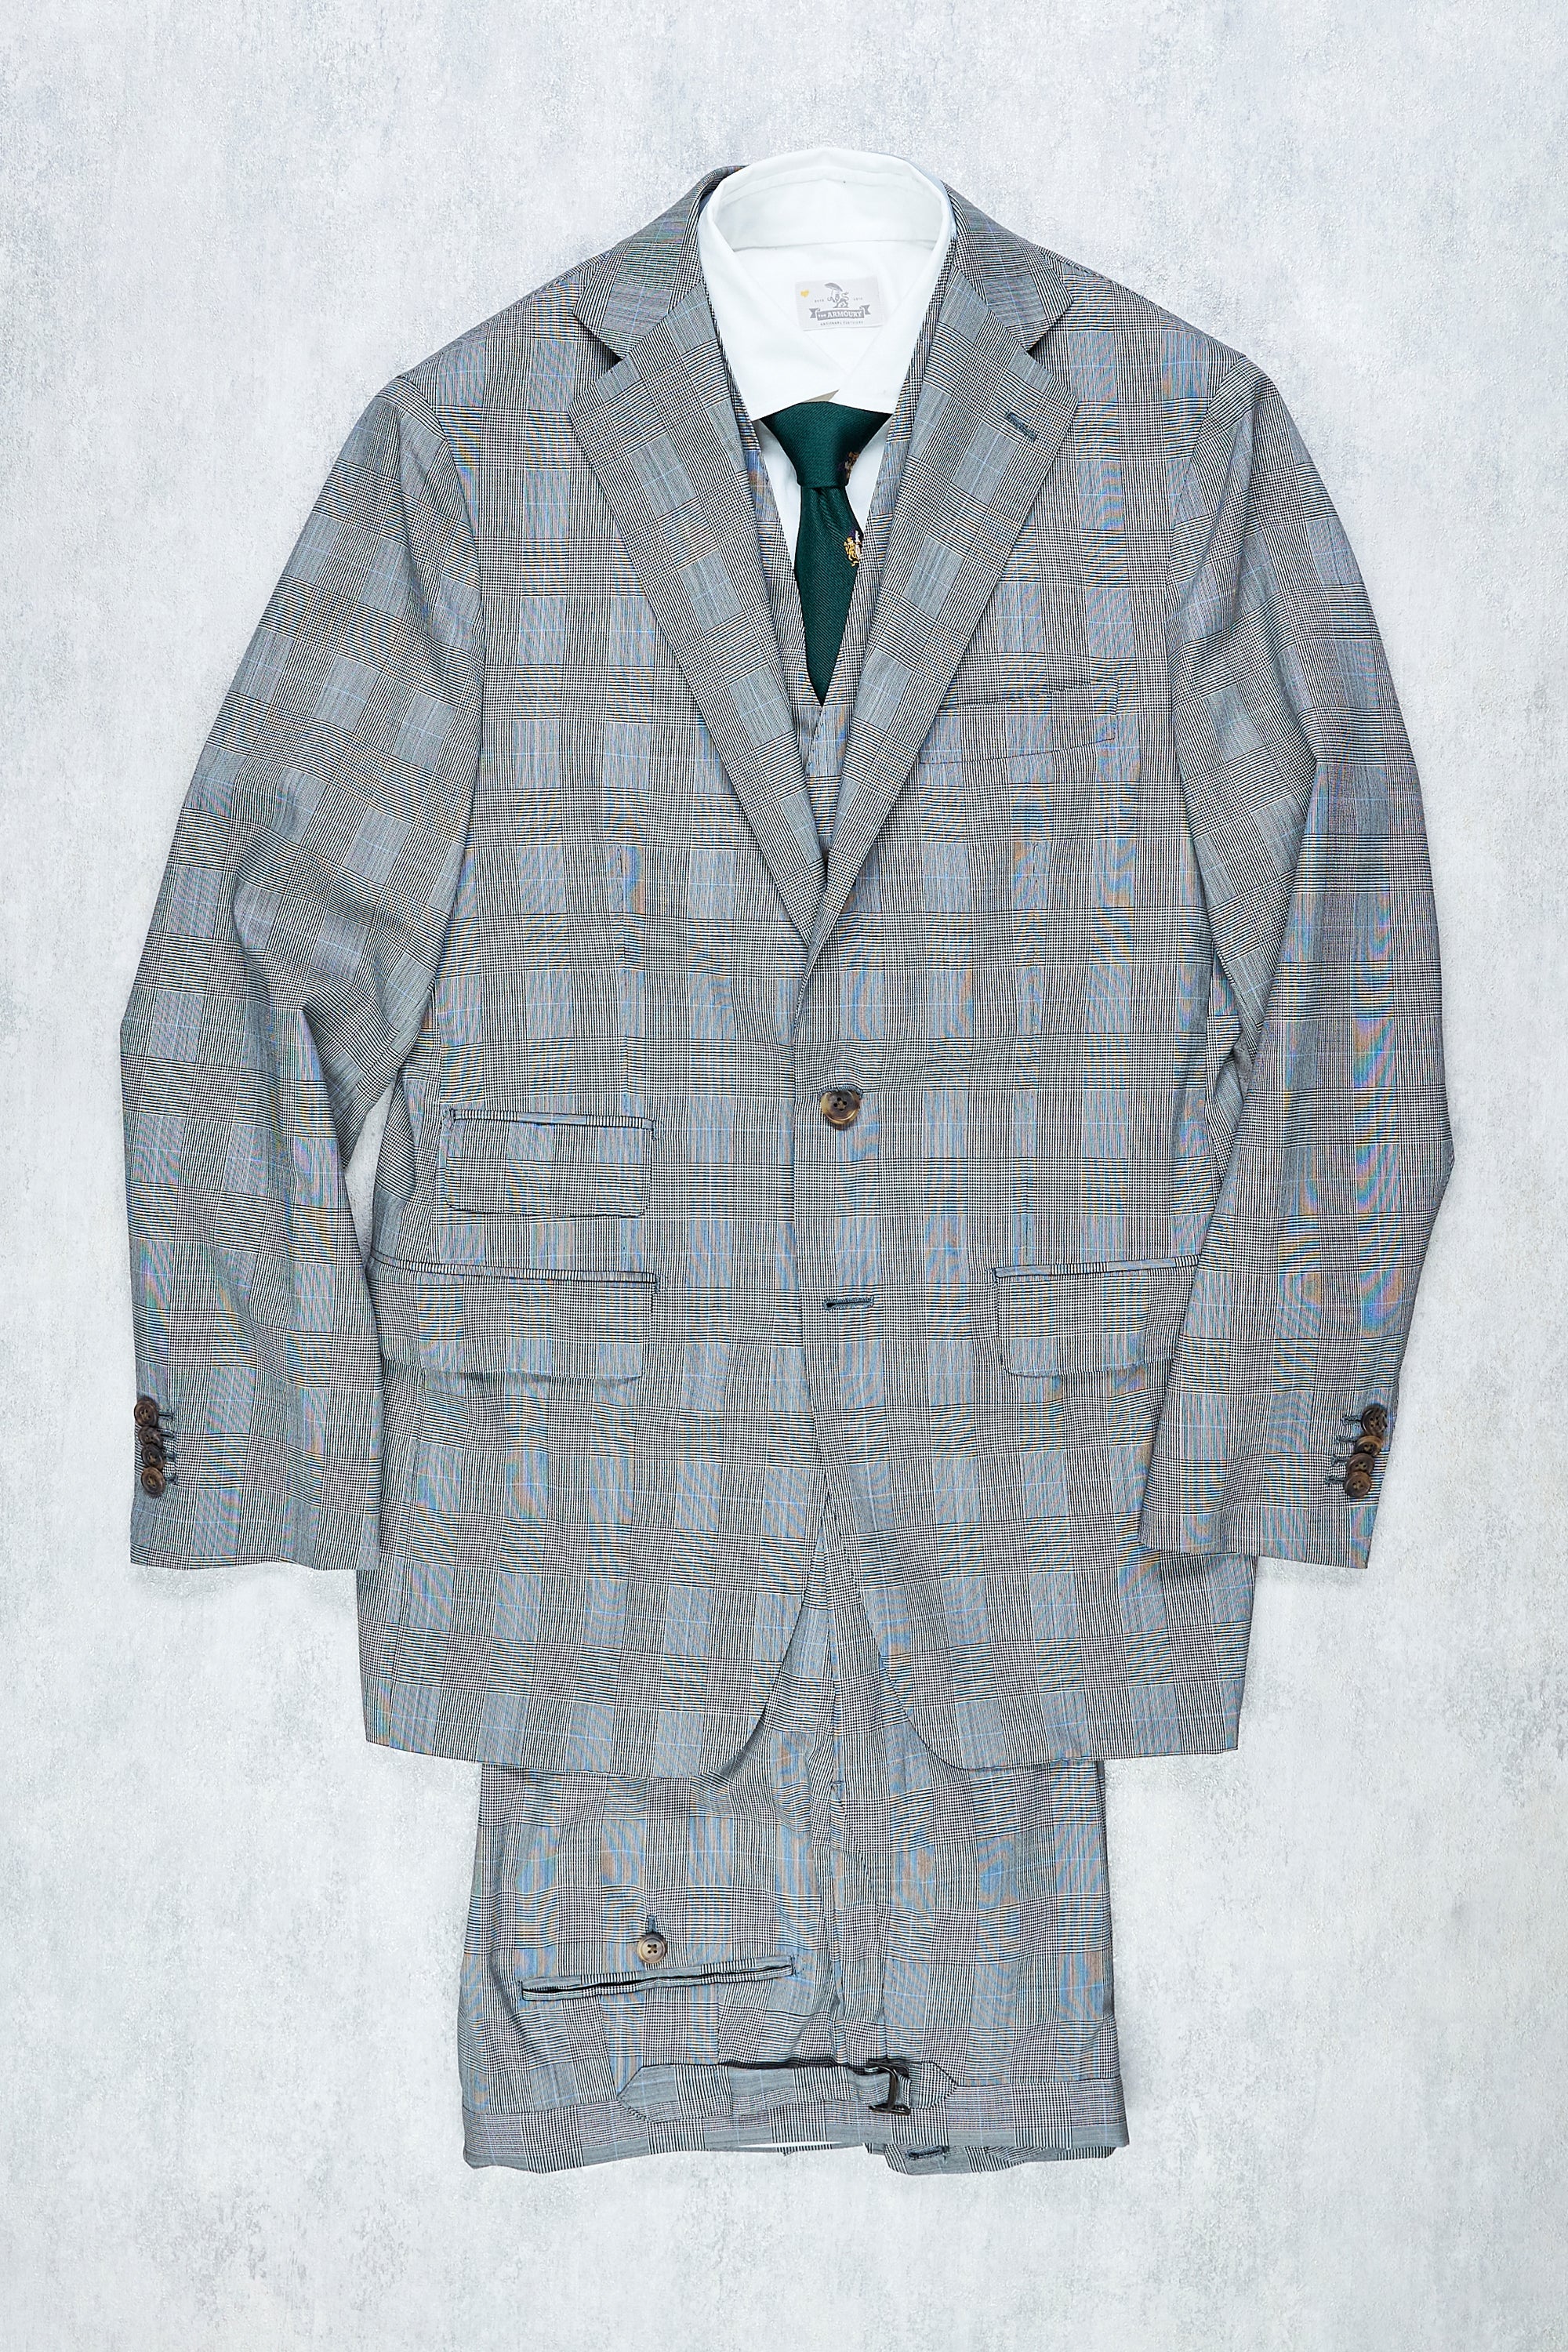 Patrick Johnson Black and White Prince of Wales Check Wool 3 Piece Suit